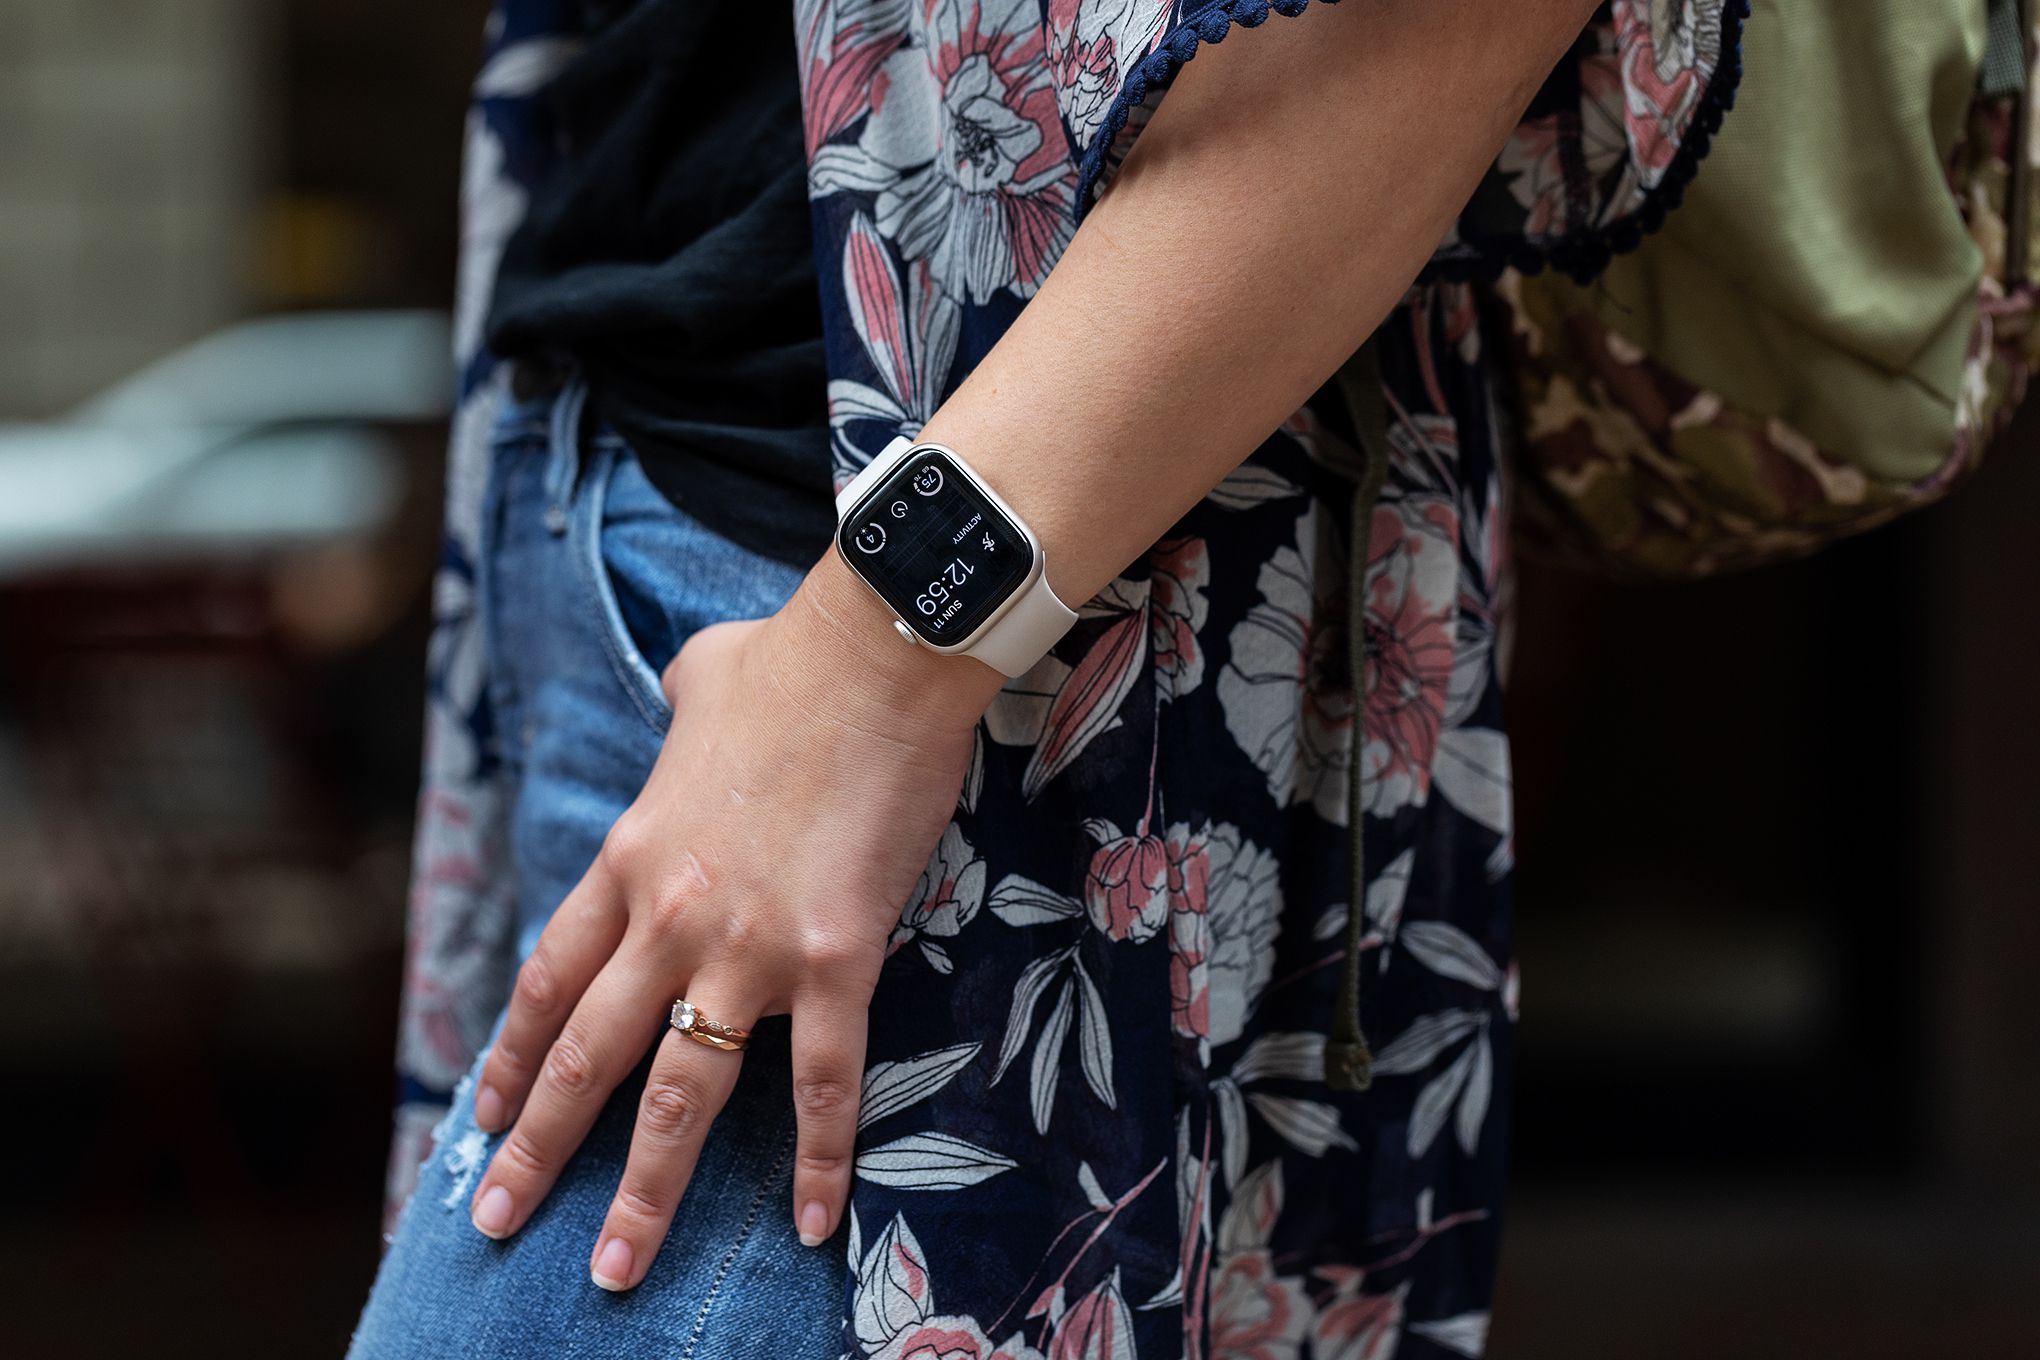 apple-watch-trong-tuong-lai-co-the-tu-dong-ket-hop-voi-day-deo-cua-chung-1